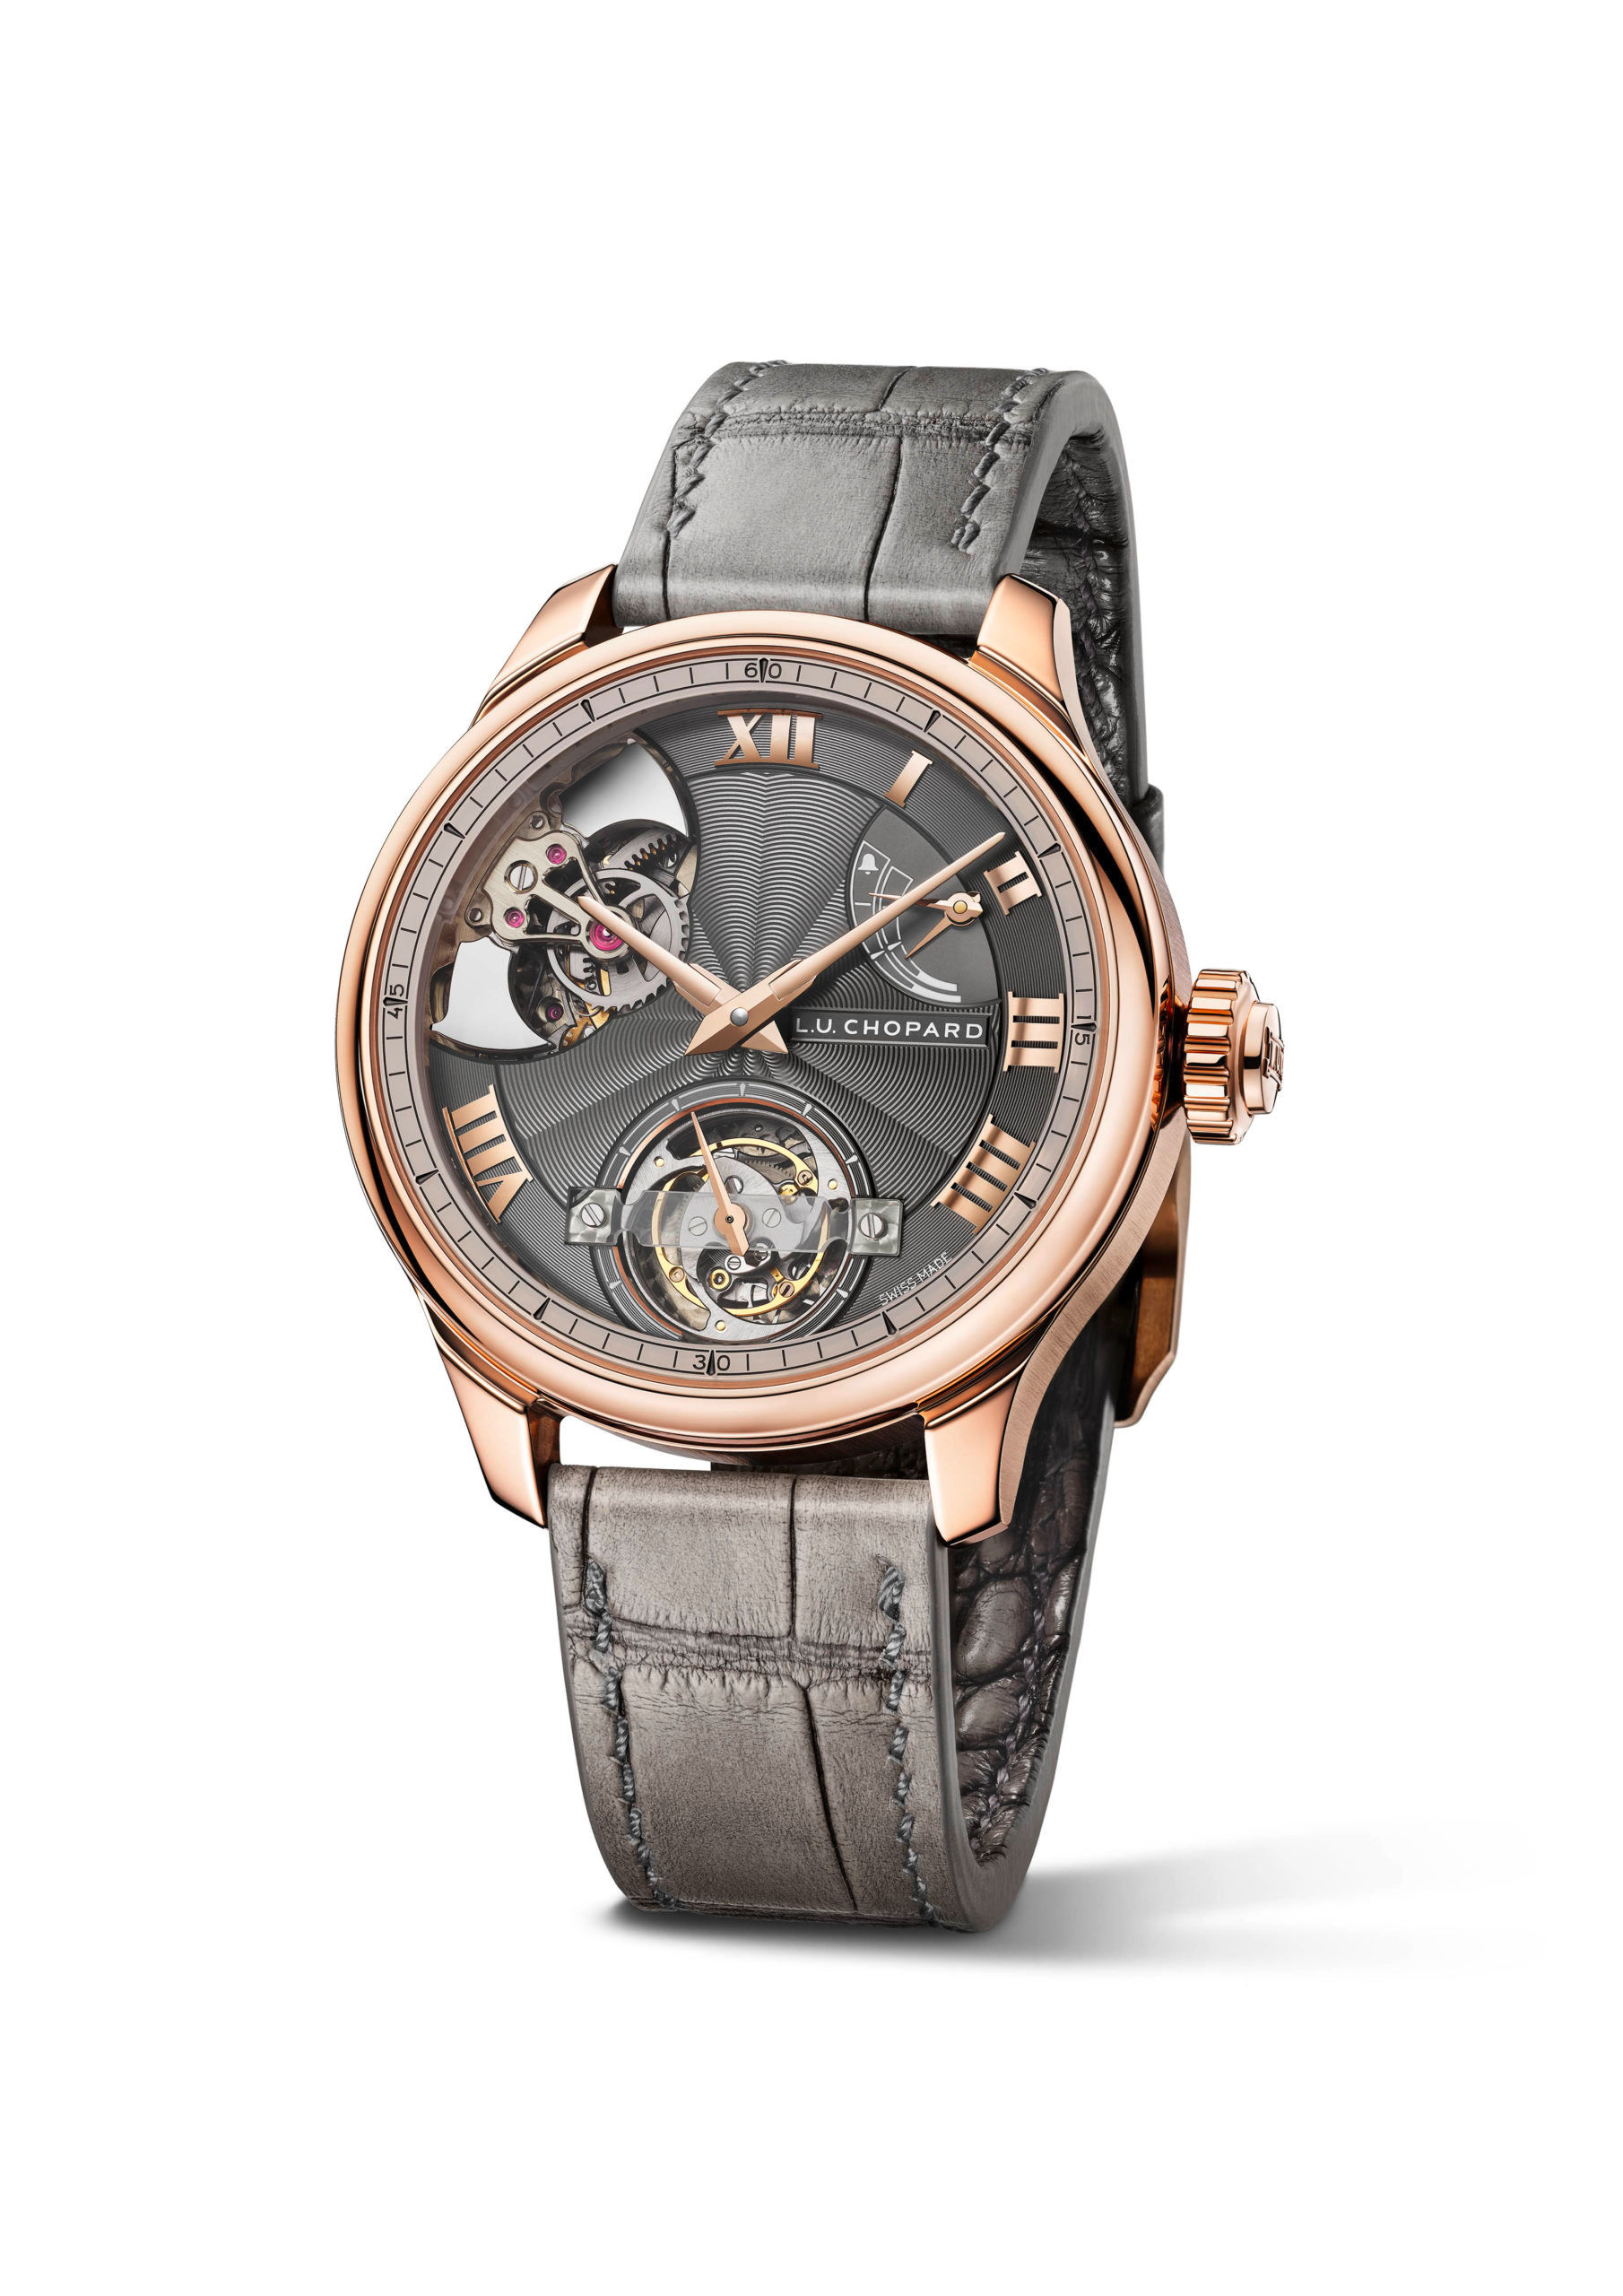 Chopard Introduces New Timepieces at Watches & Wonders 2022